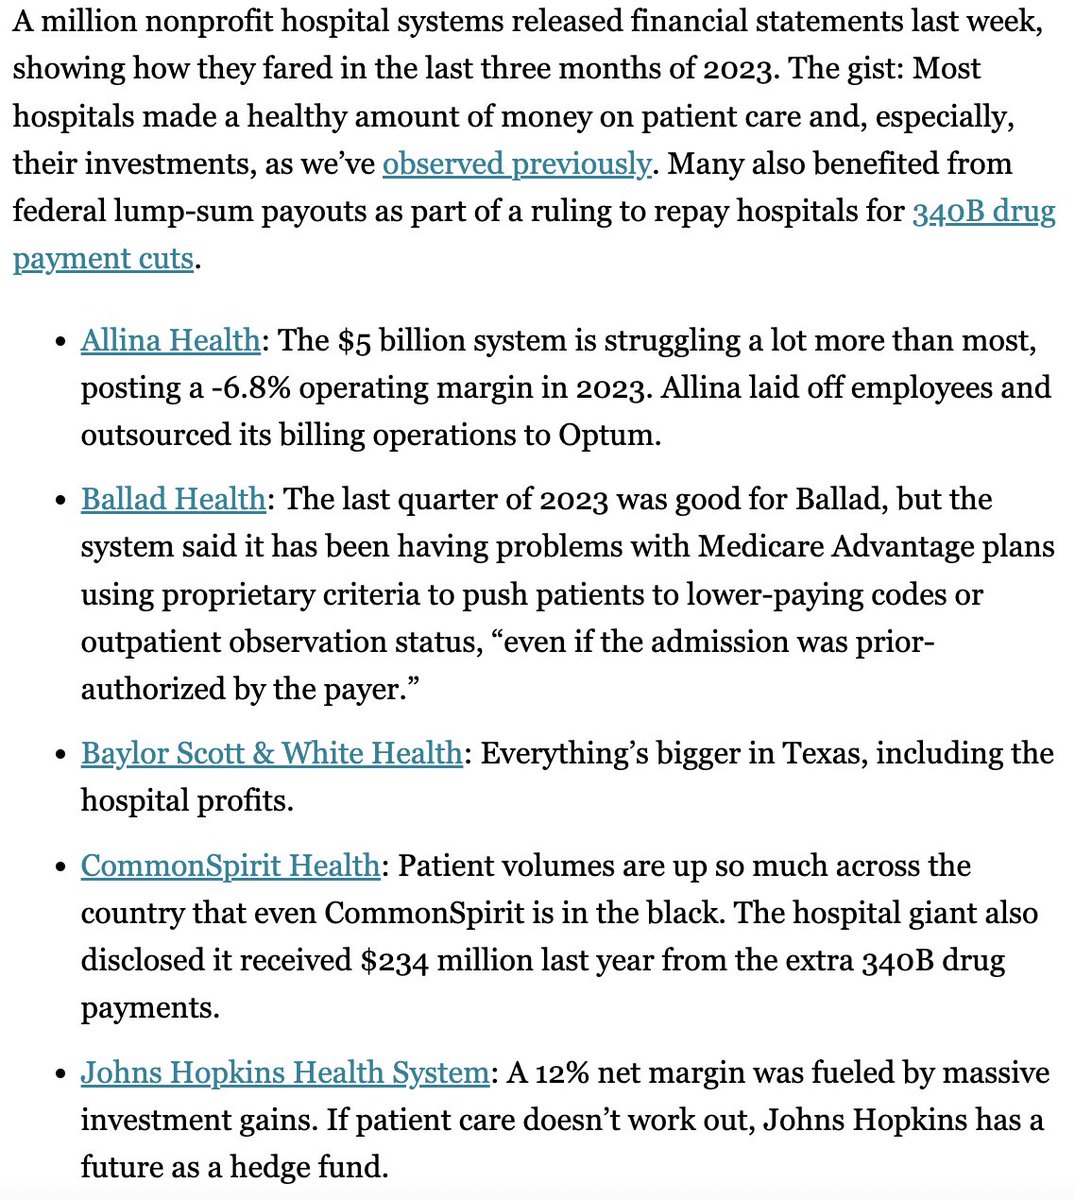 Many hospitals are doing quite well, especially when you factor in their huge investment arms. Do not buy the narrative that all hospitals are in dire straits. marketing.statnews.com/medicare-advan…